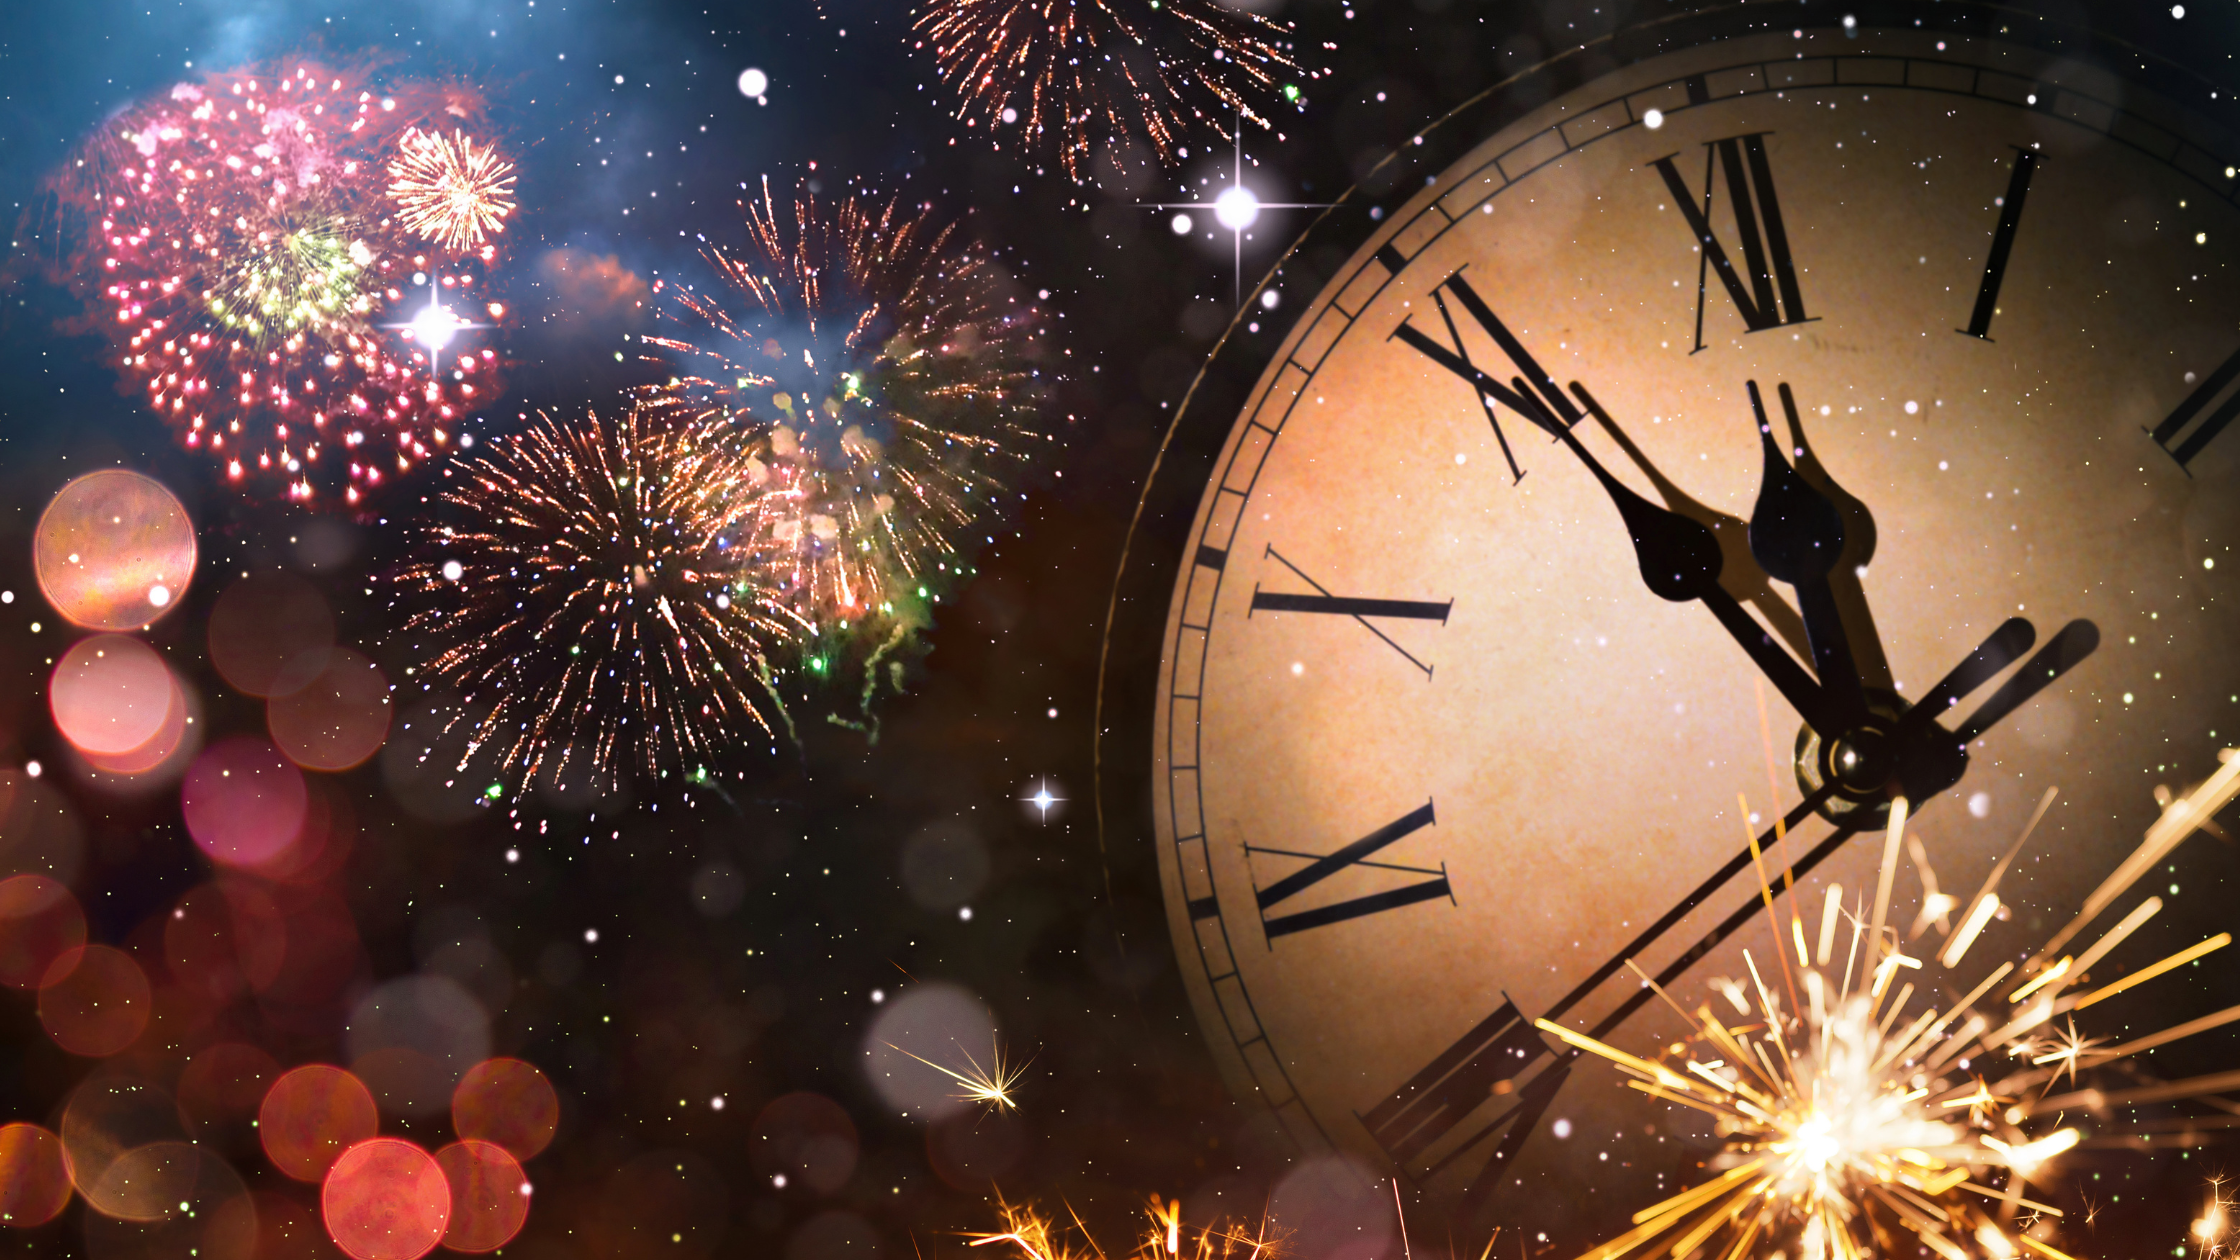 large analog clockfront surrounded by exploding fireworks